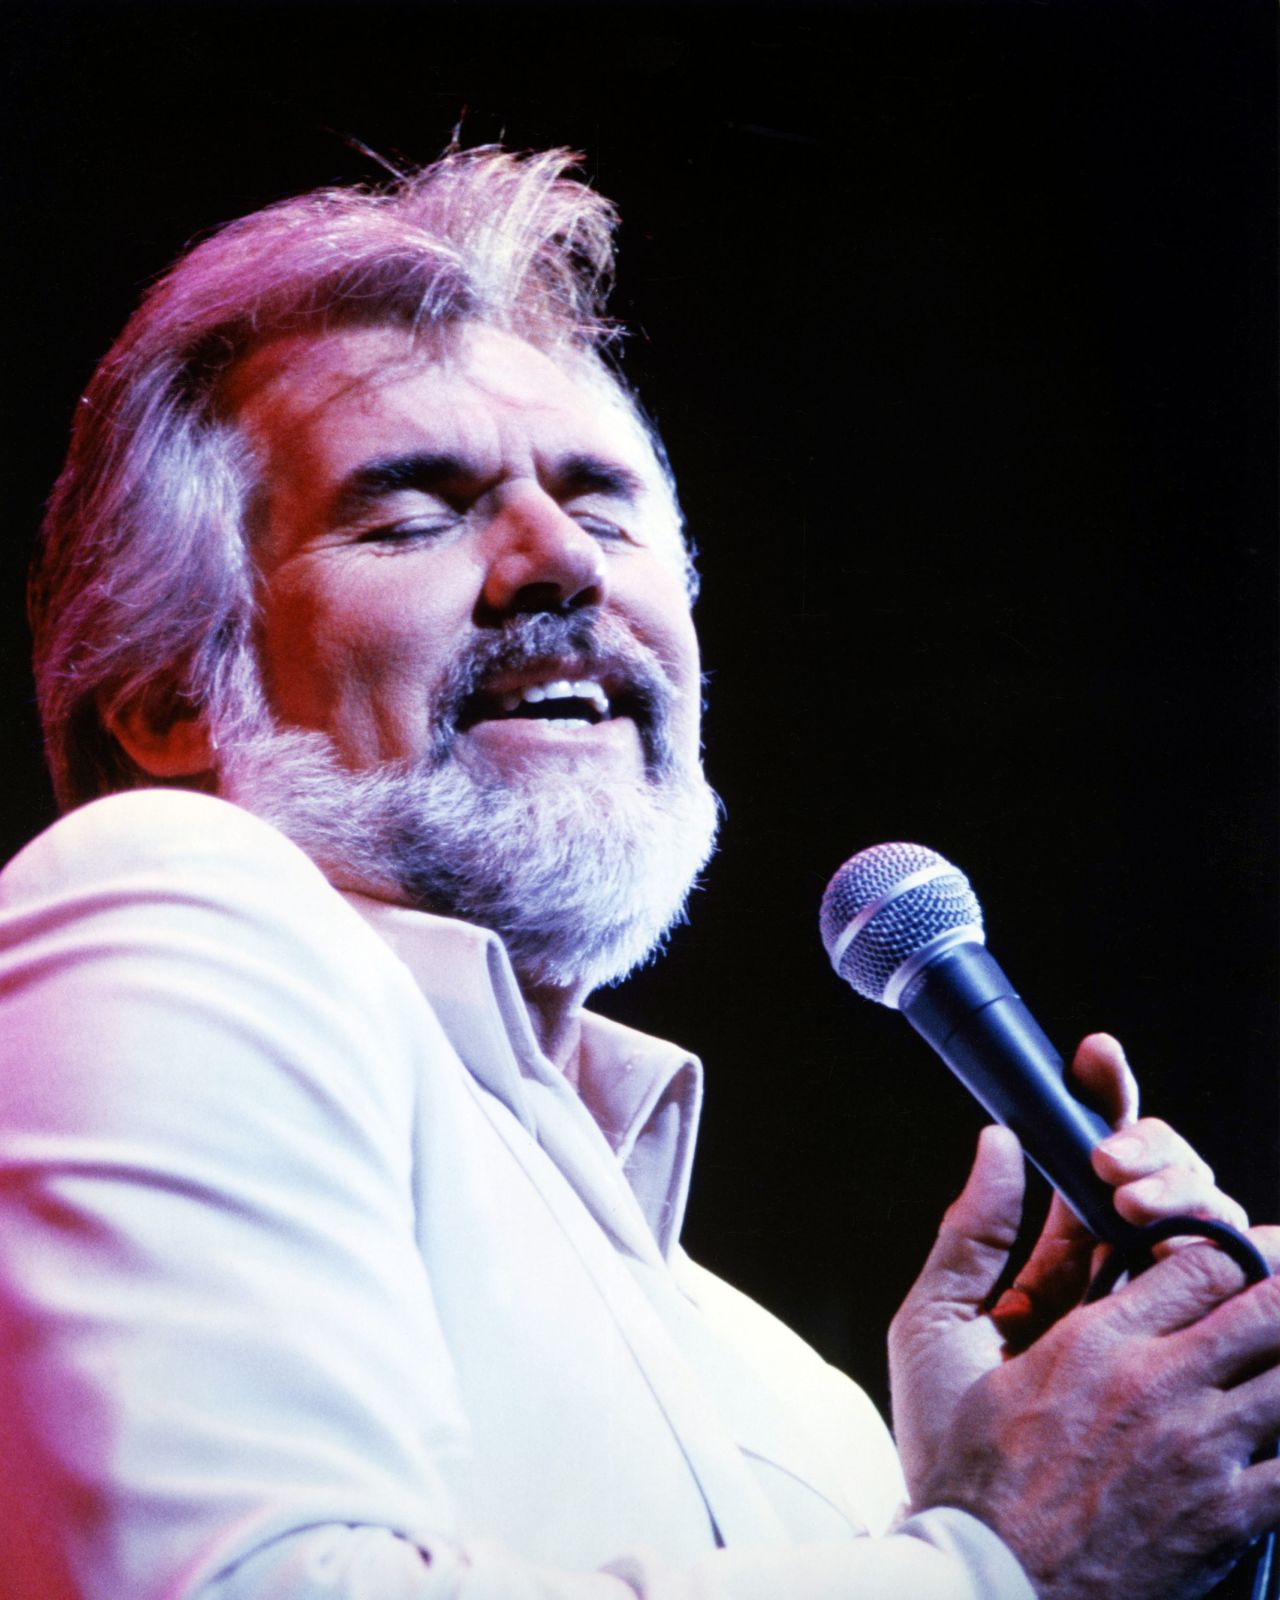 <a href="https://www.cnn.com/2020/03/21/entertainment/kenny-rogers-country-singer-dies/index.html" target="_blank">Kenny Rogers</a>, whose legendary music career spanned six decades, died on March 20. He was 81. Rogers had 24 No. 1 hits during his career, and more than 50 million of his albums sold in the United States alone.